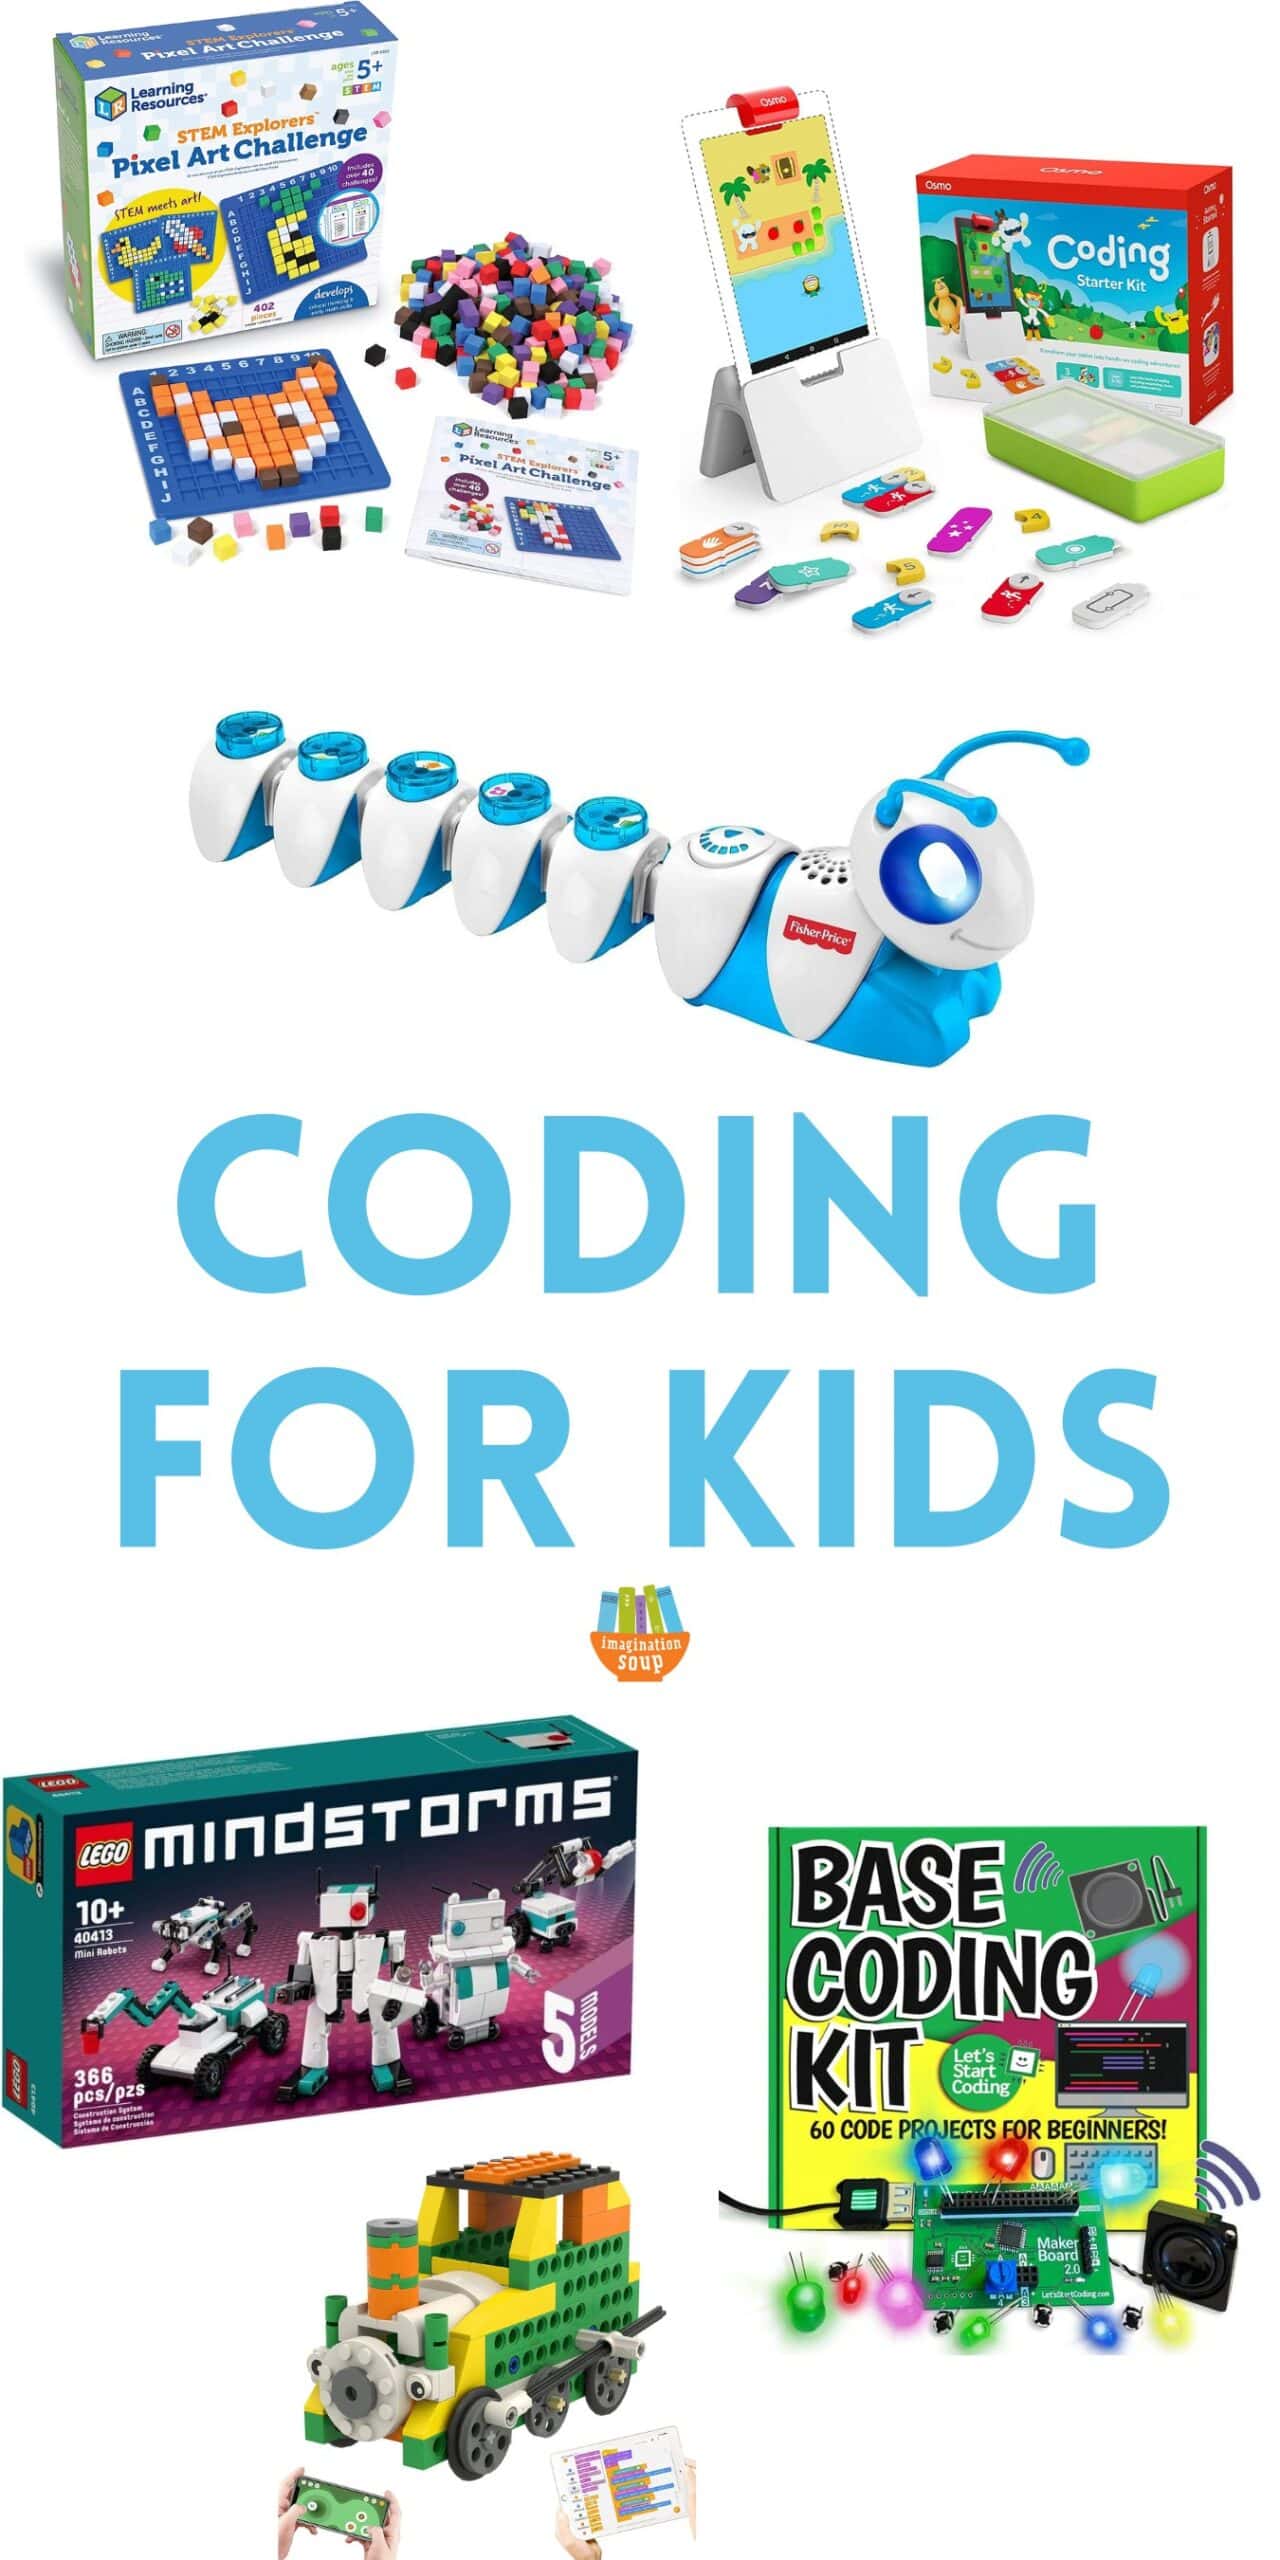 coding for kids: toys, games, websites, books, and more!